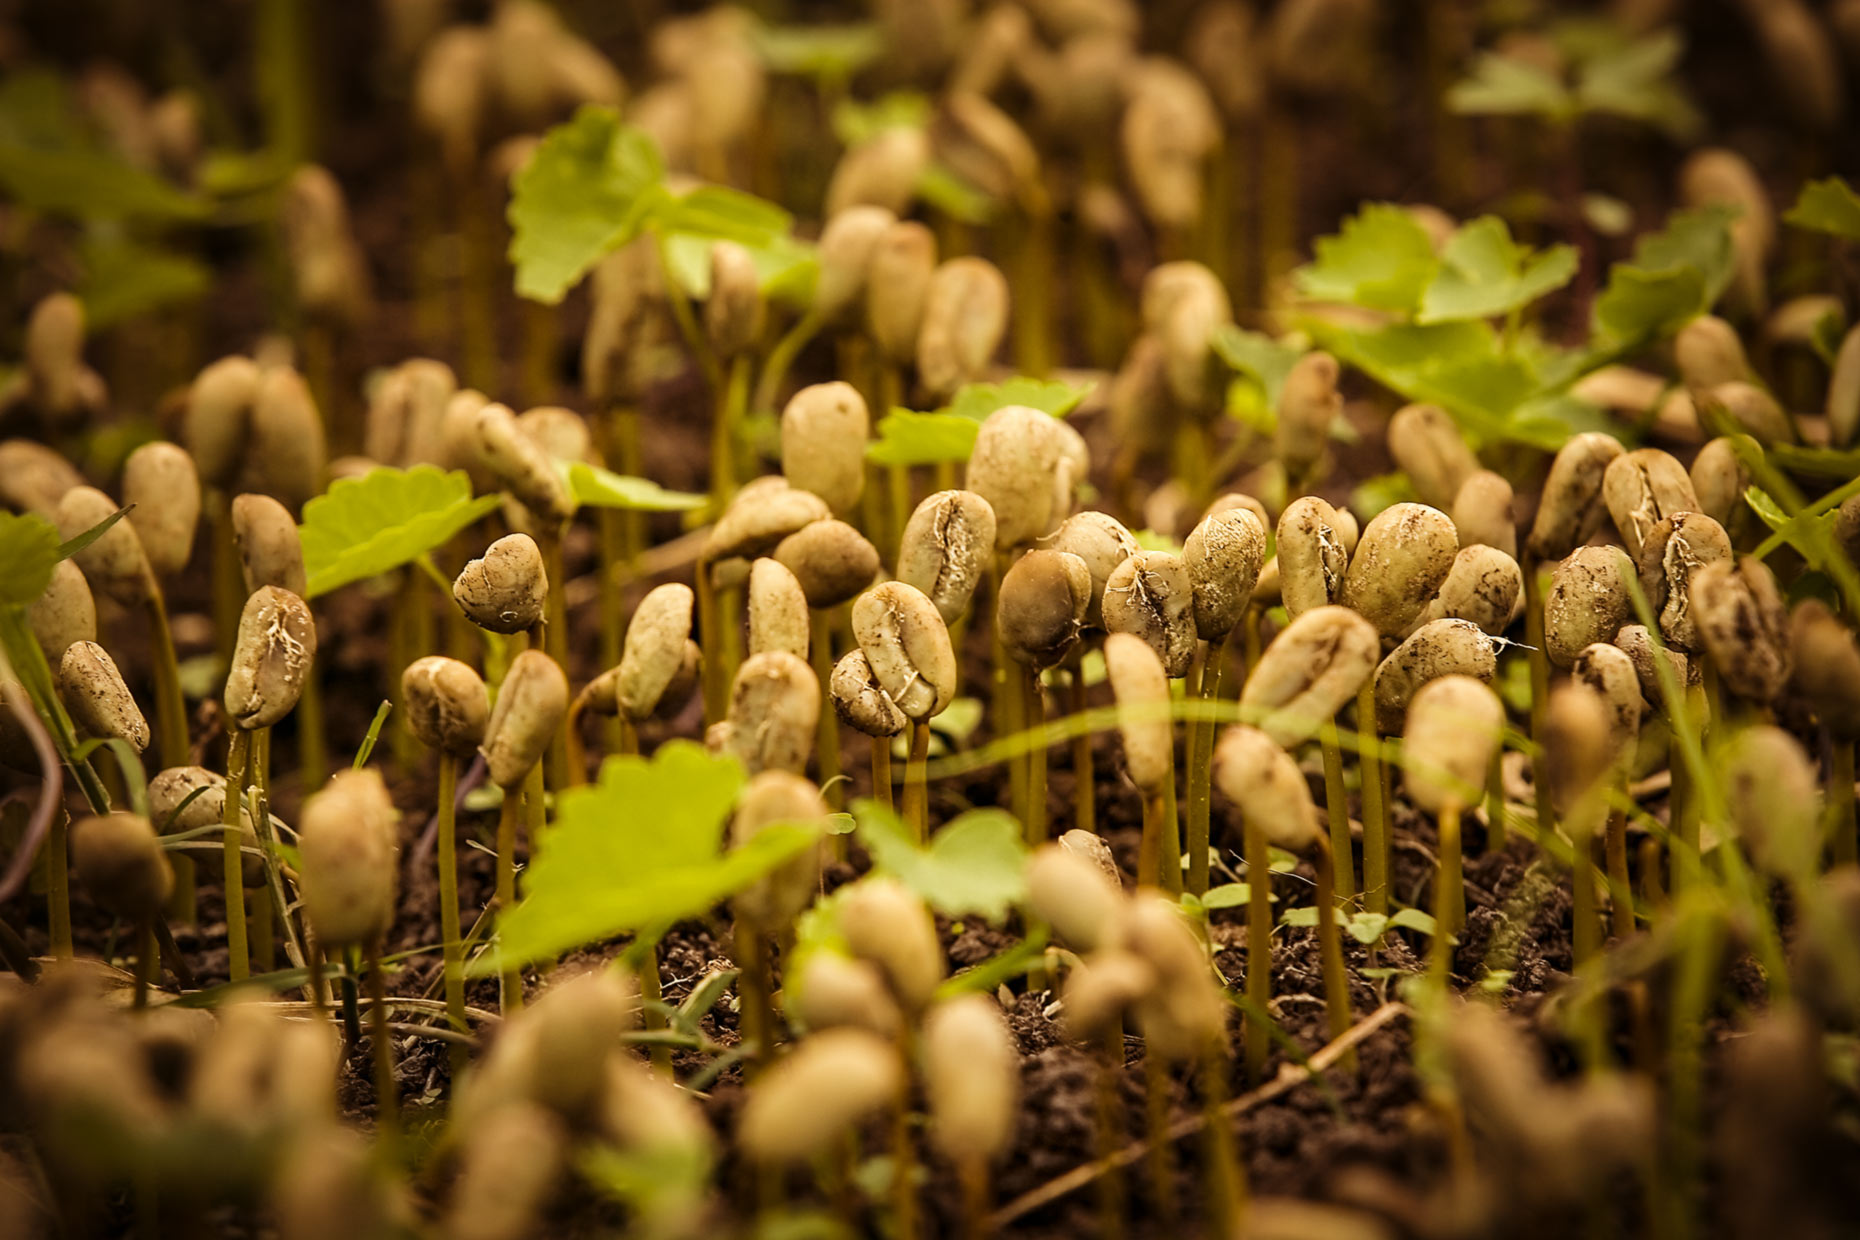 Coffee beans sprouting. Agriculture photography